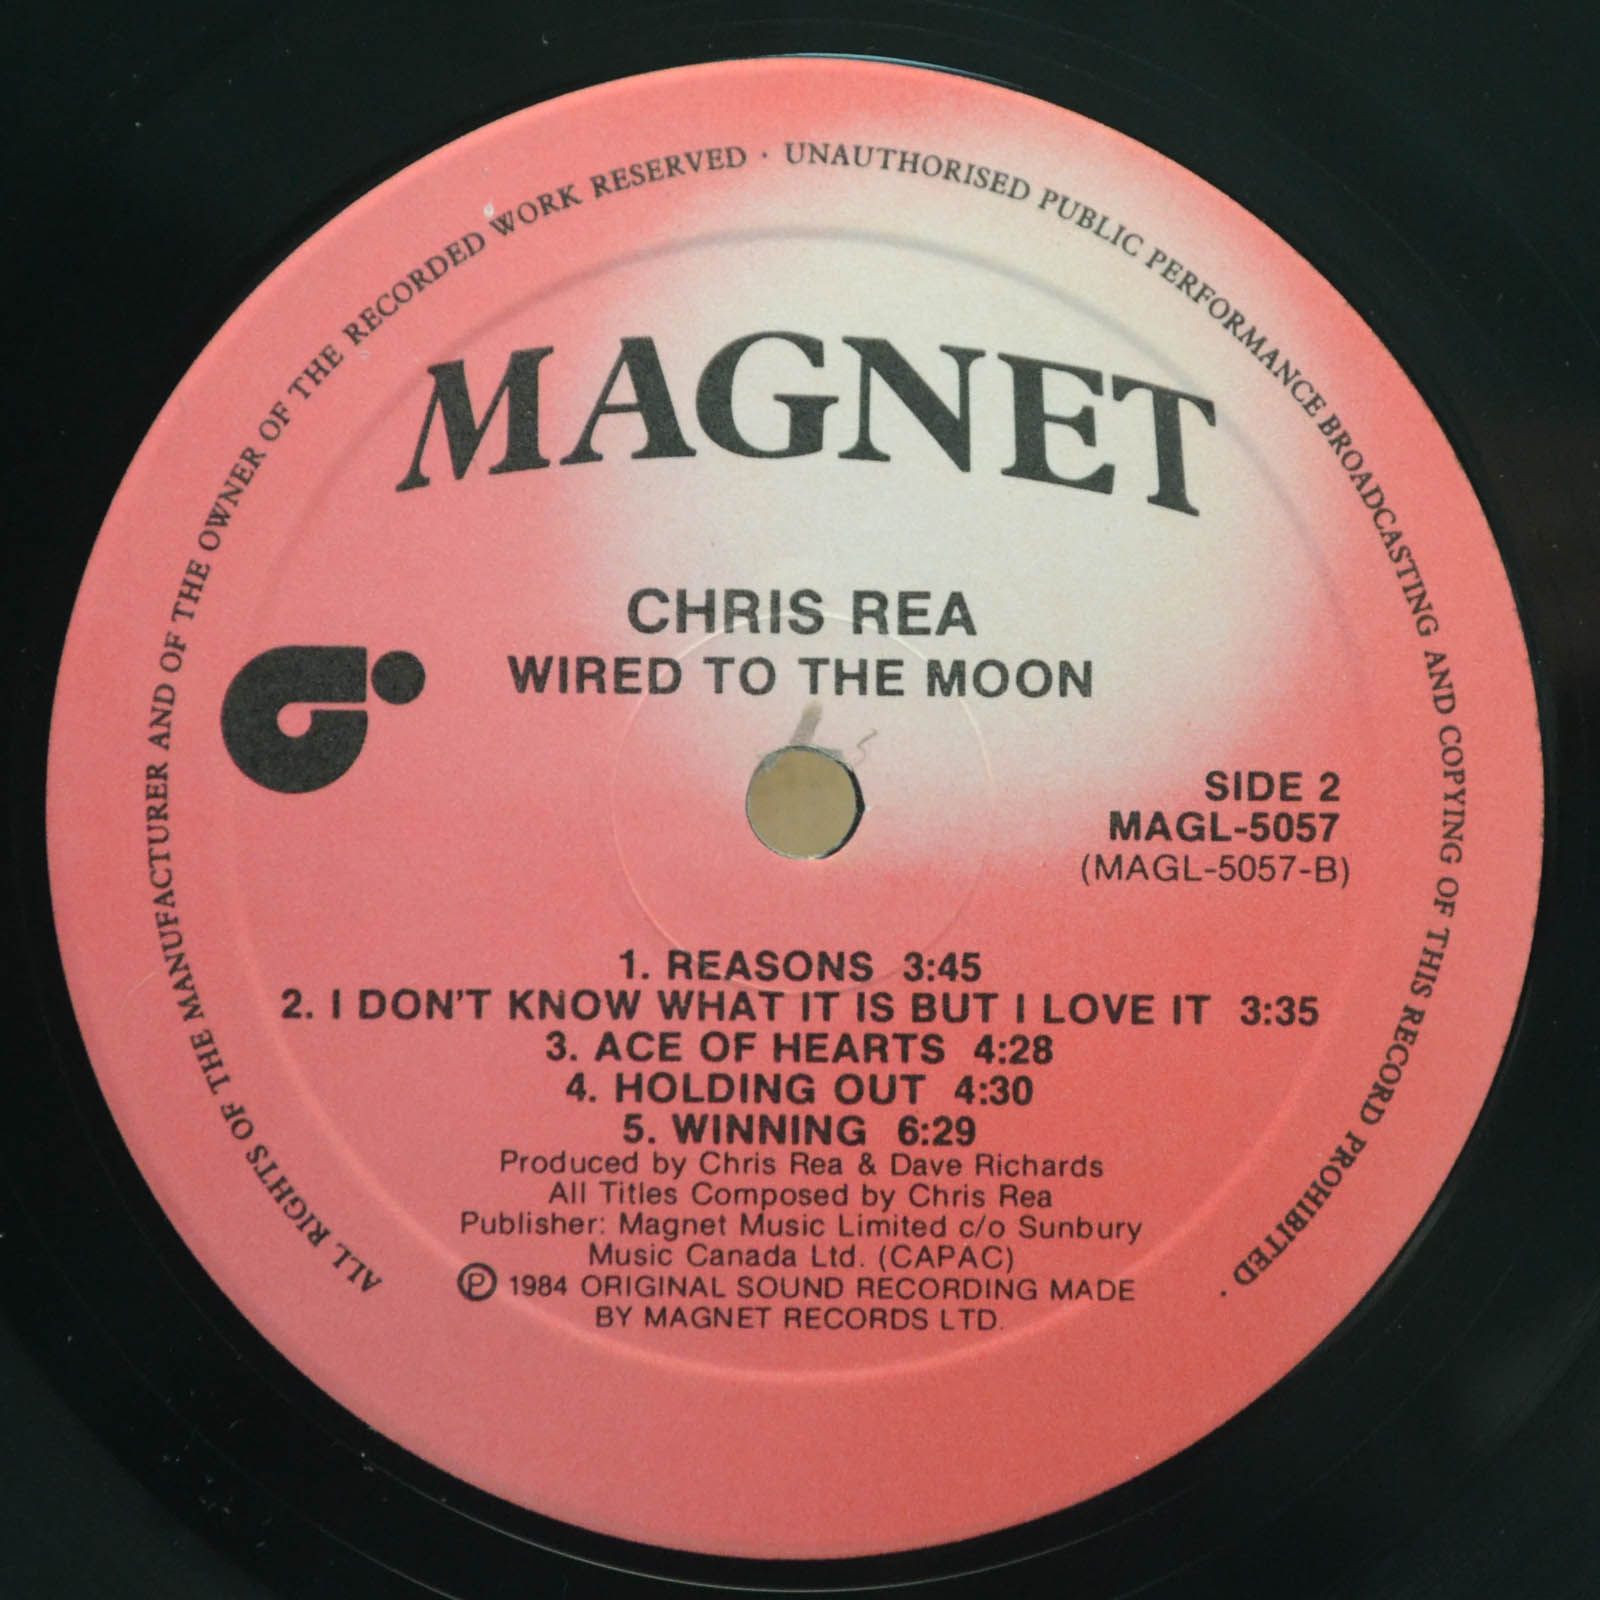 Chris Rea — Wired To The Moon, 1984